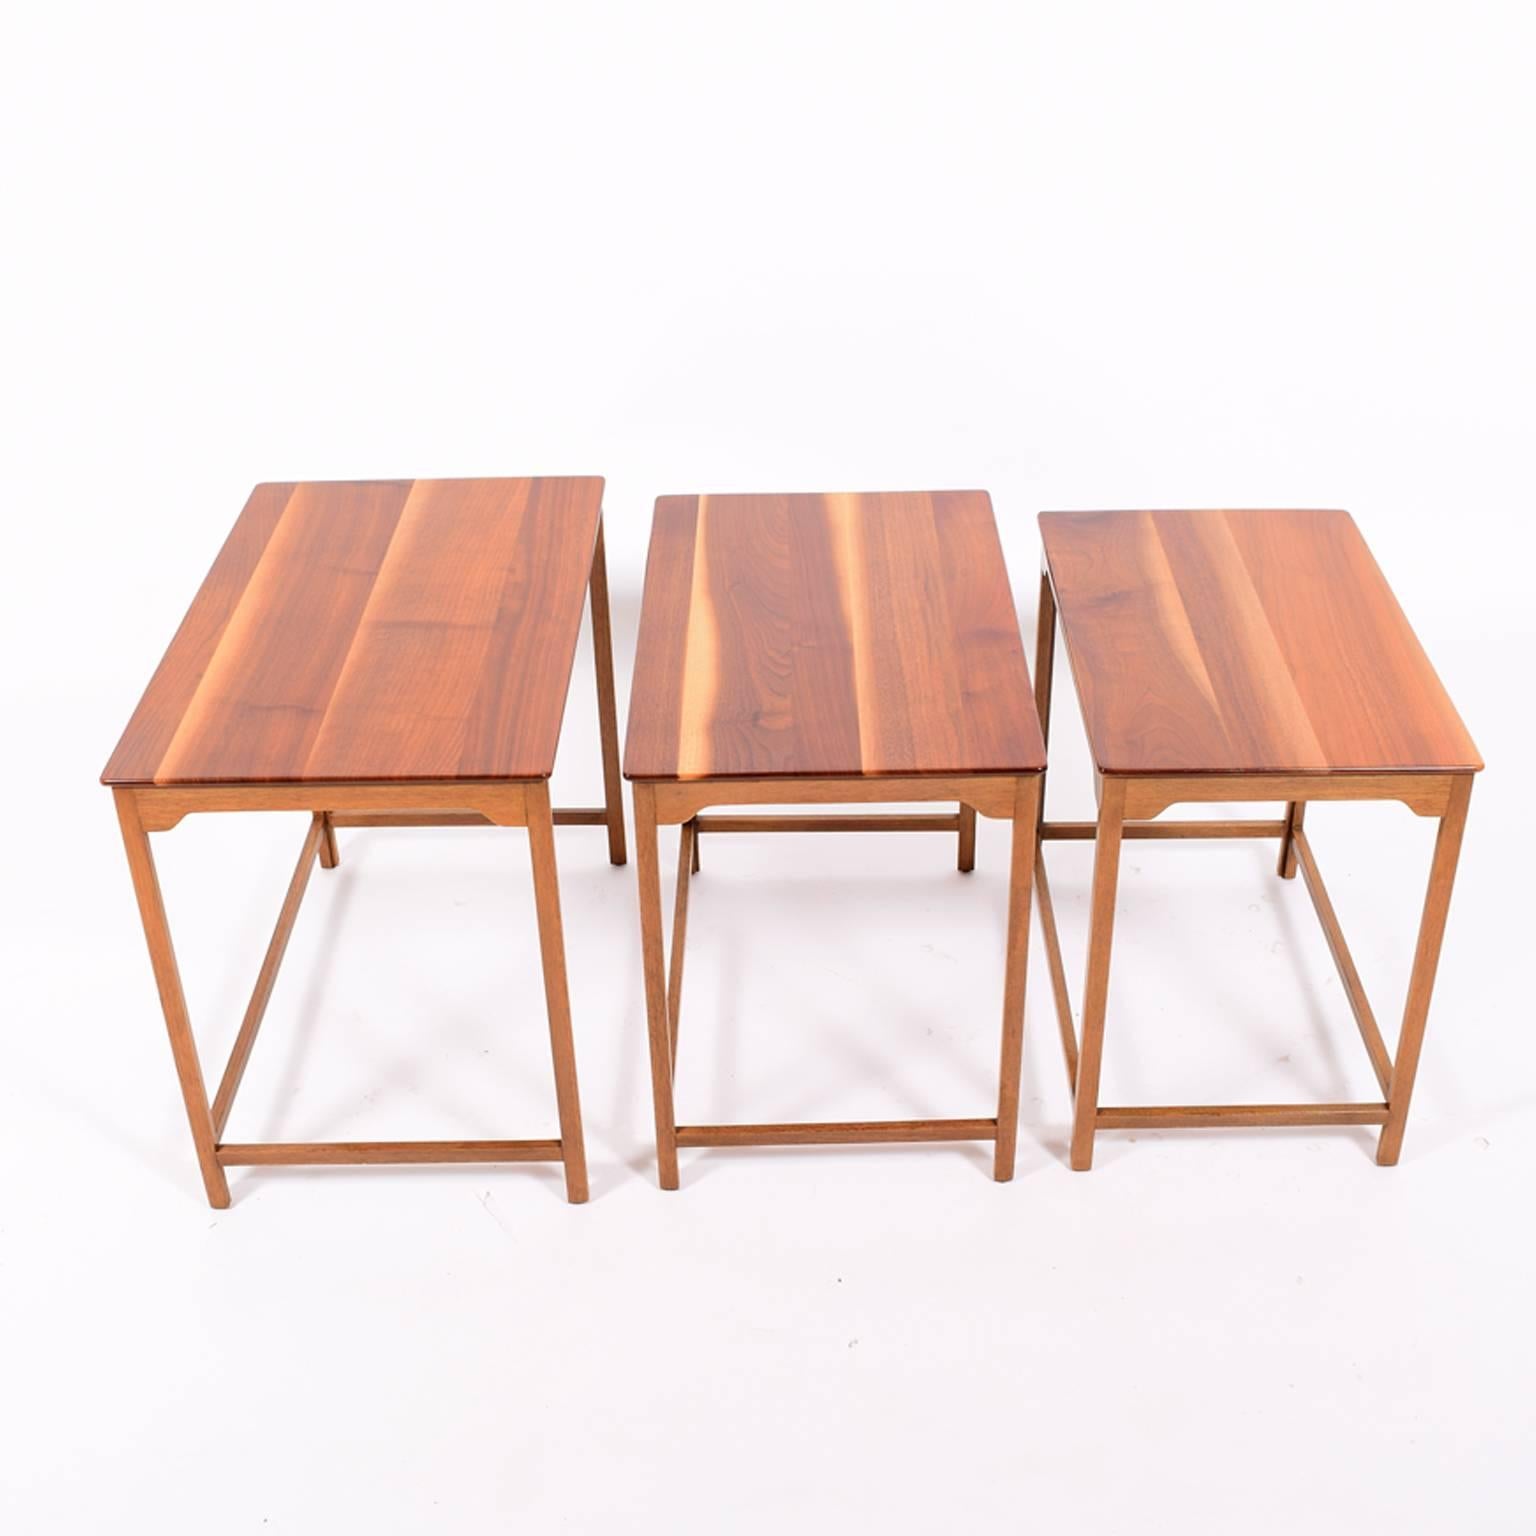 Solid walnut set of three tables designs by Wormley in 1940s, made by Dunbar, gold metal label.